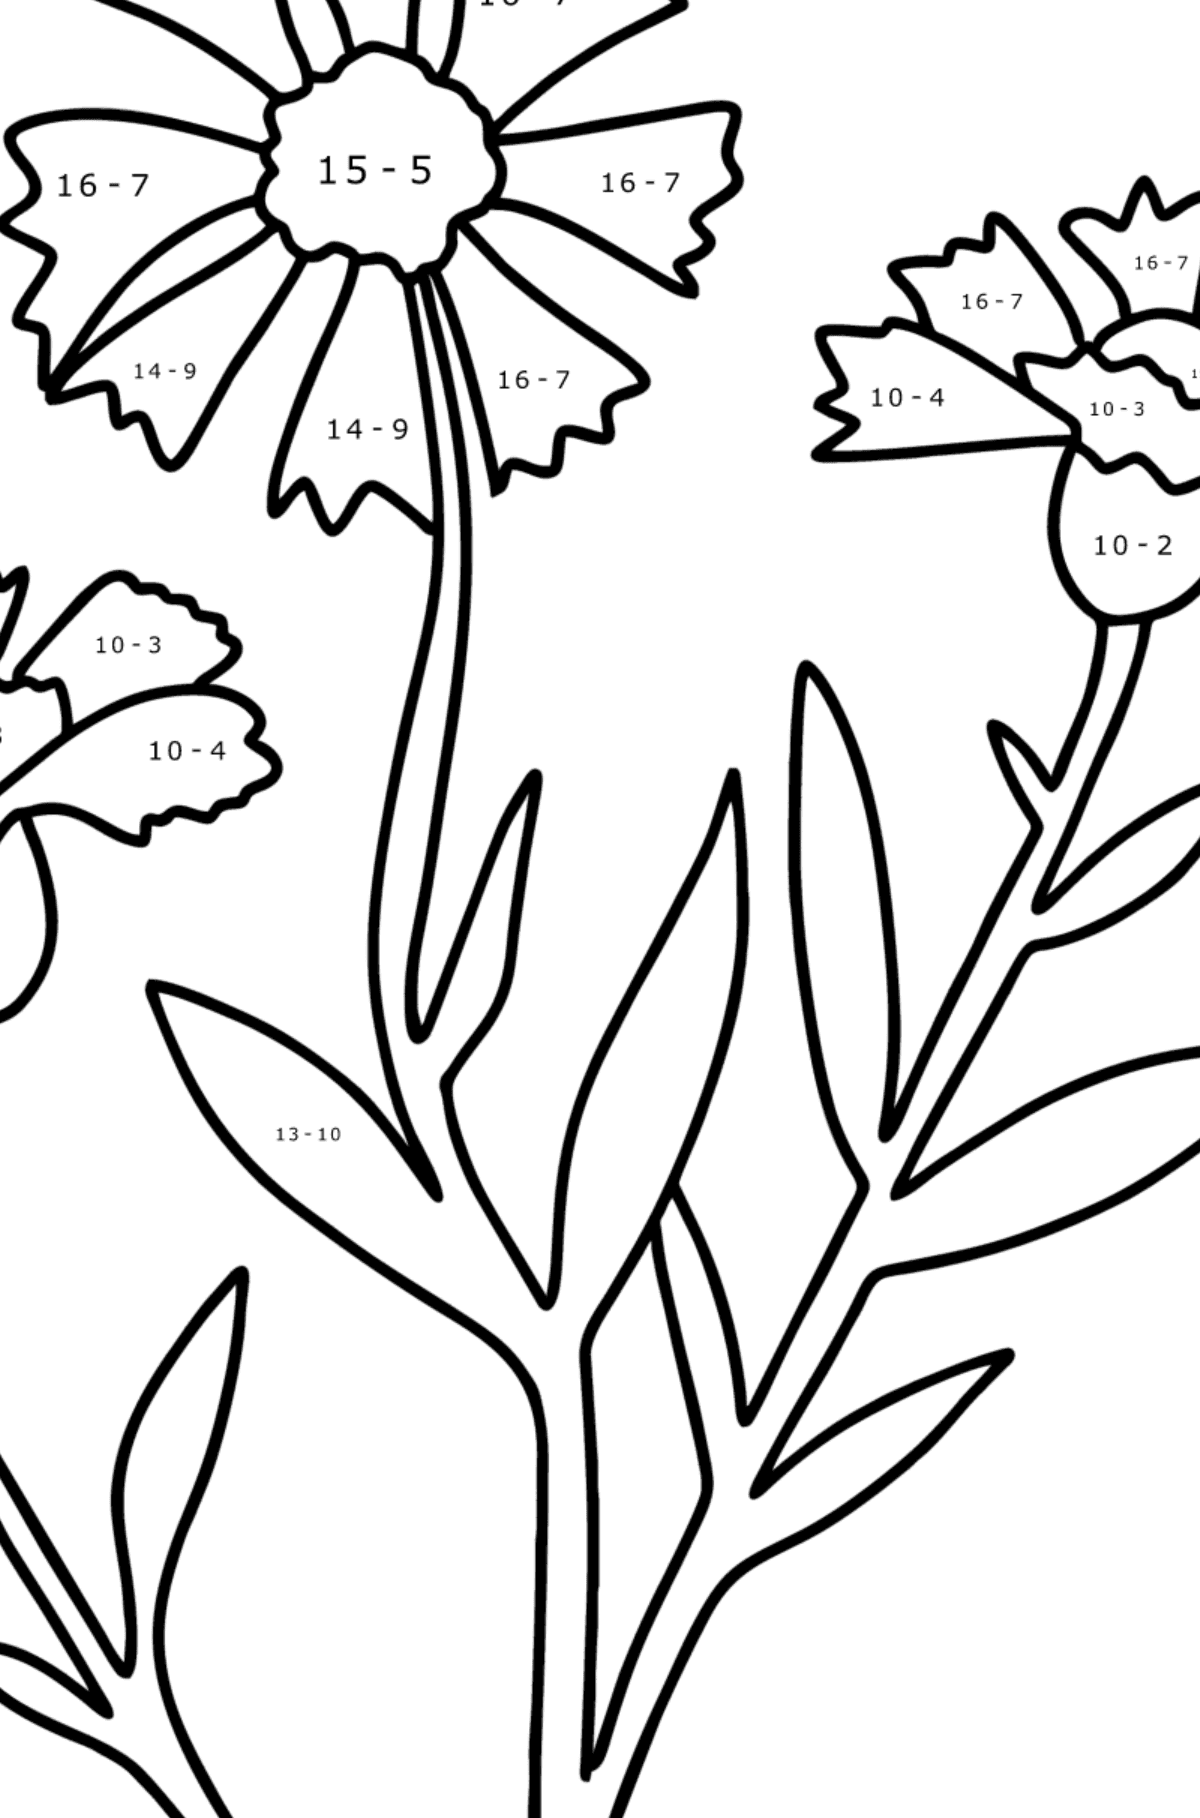 Knapweed coloring page - Math Coloring - Subtraction for Kids